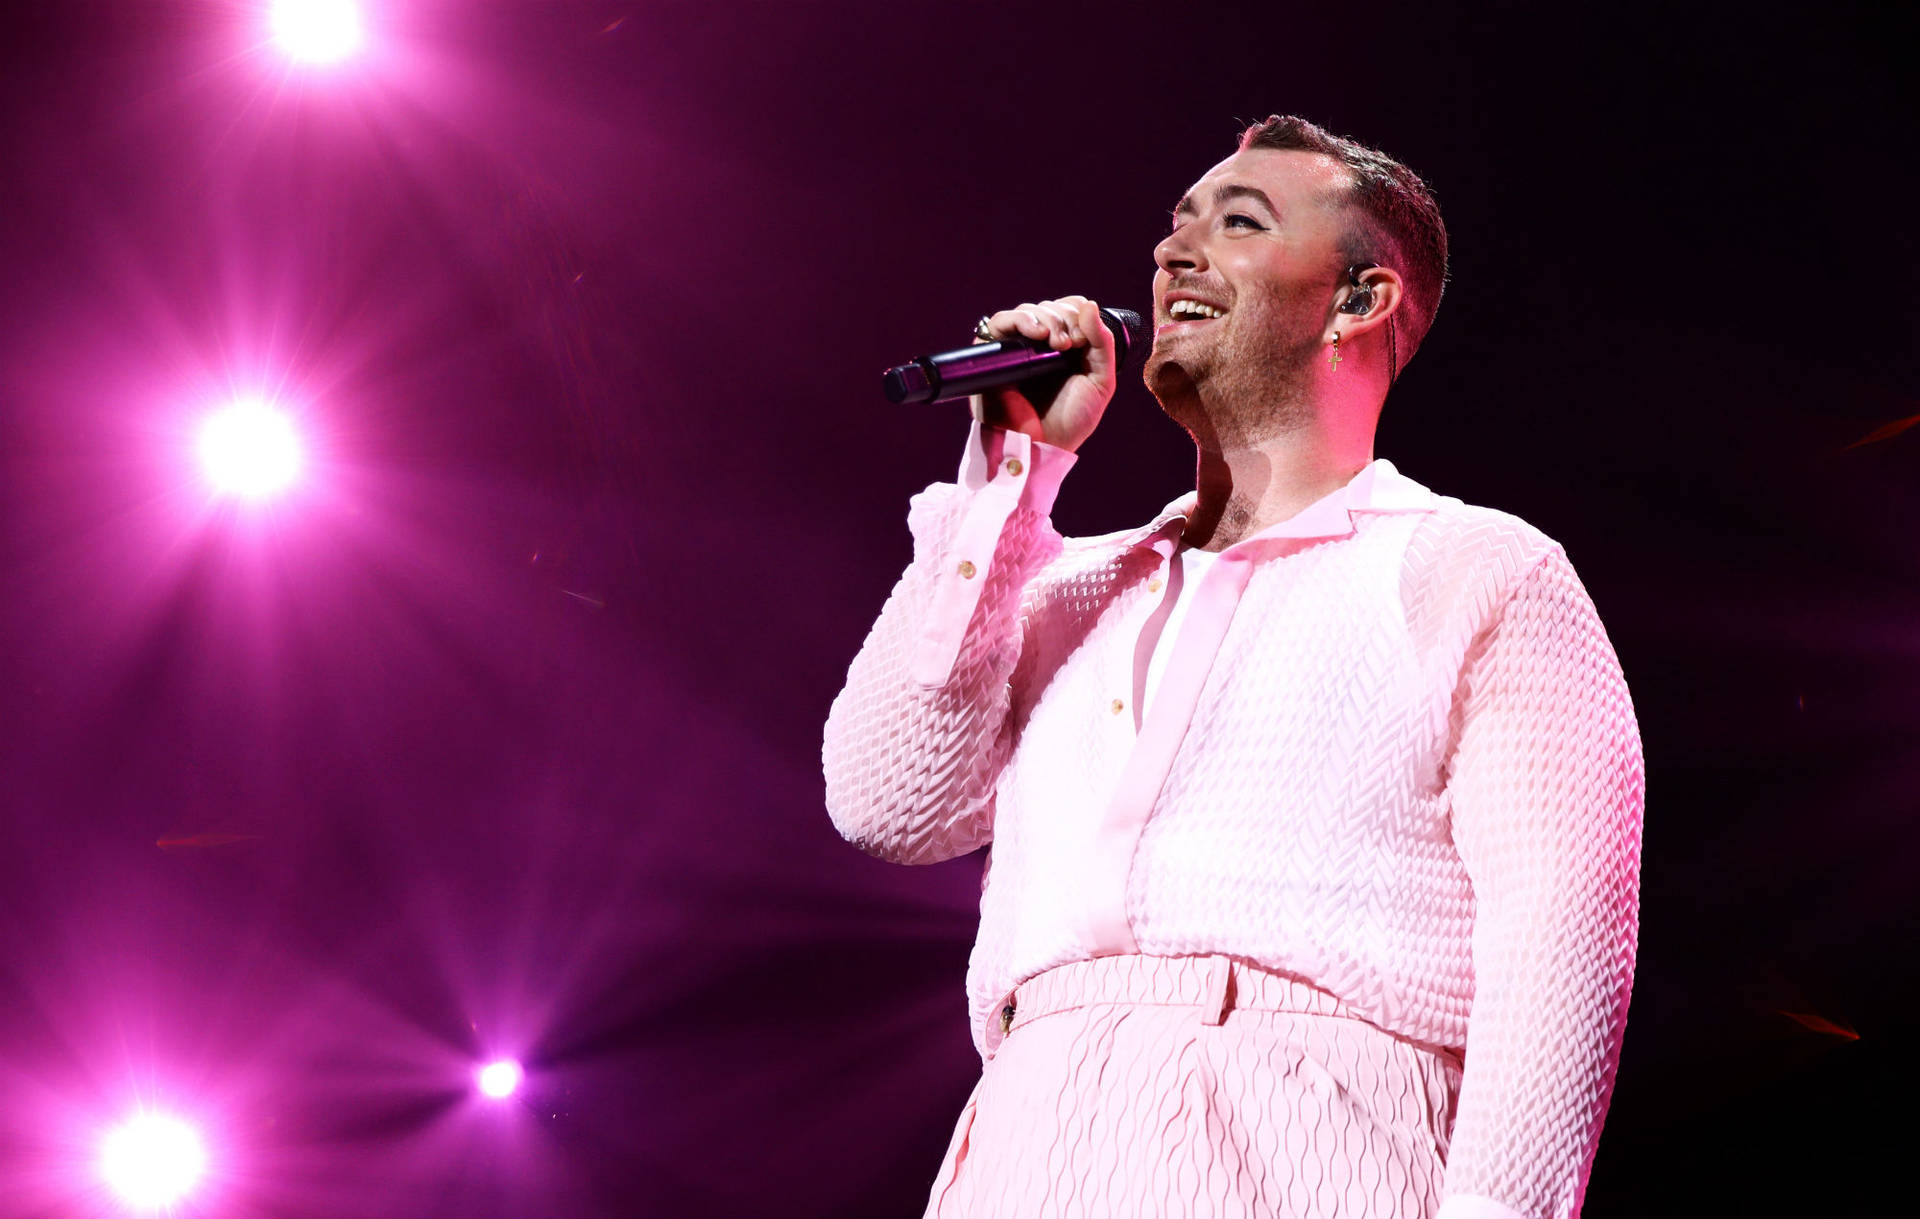 Sam Smith At Jingle Bell Ball 2019 Background